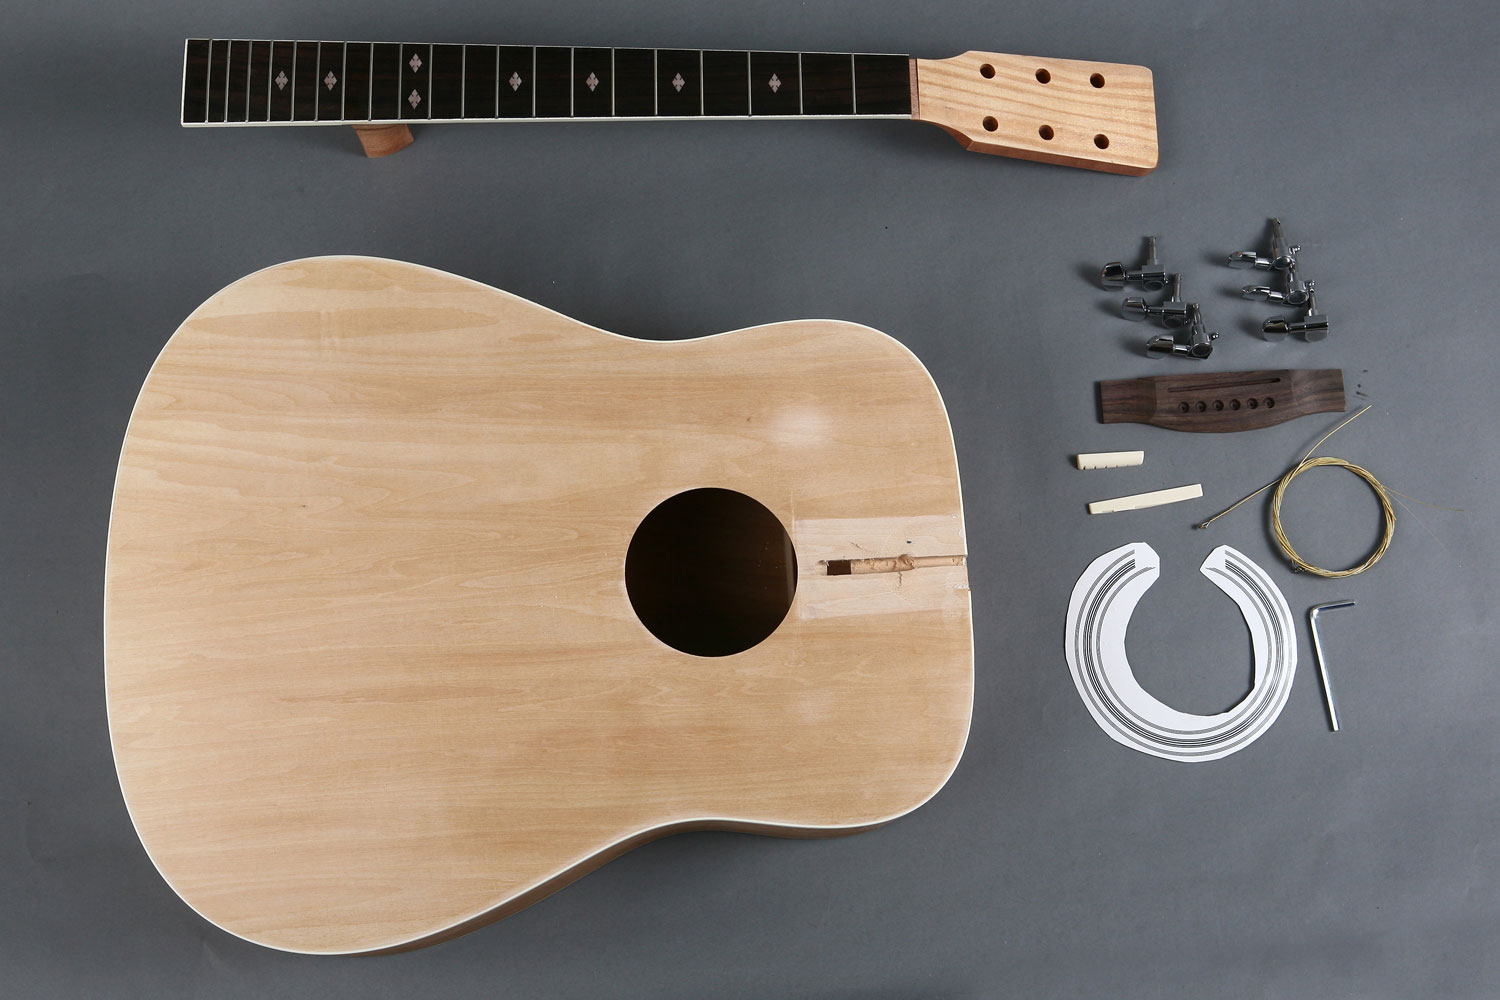 LoveinDIY Professional 41 Inch Acoustic Guitar DIY Kit Including Unfinished Spruce Wood